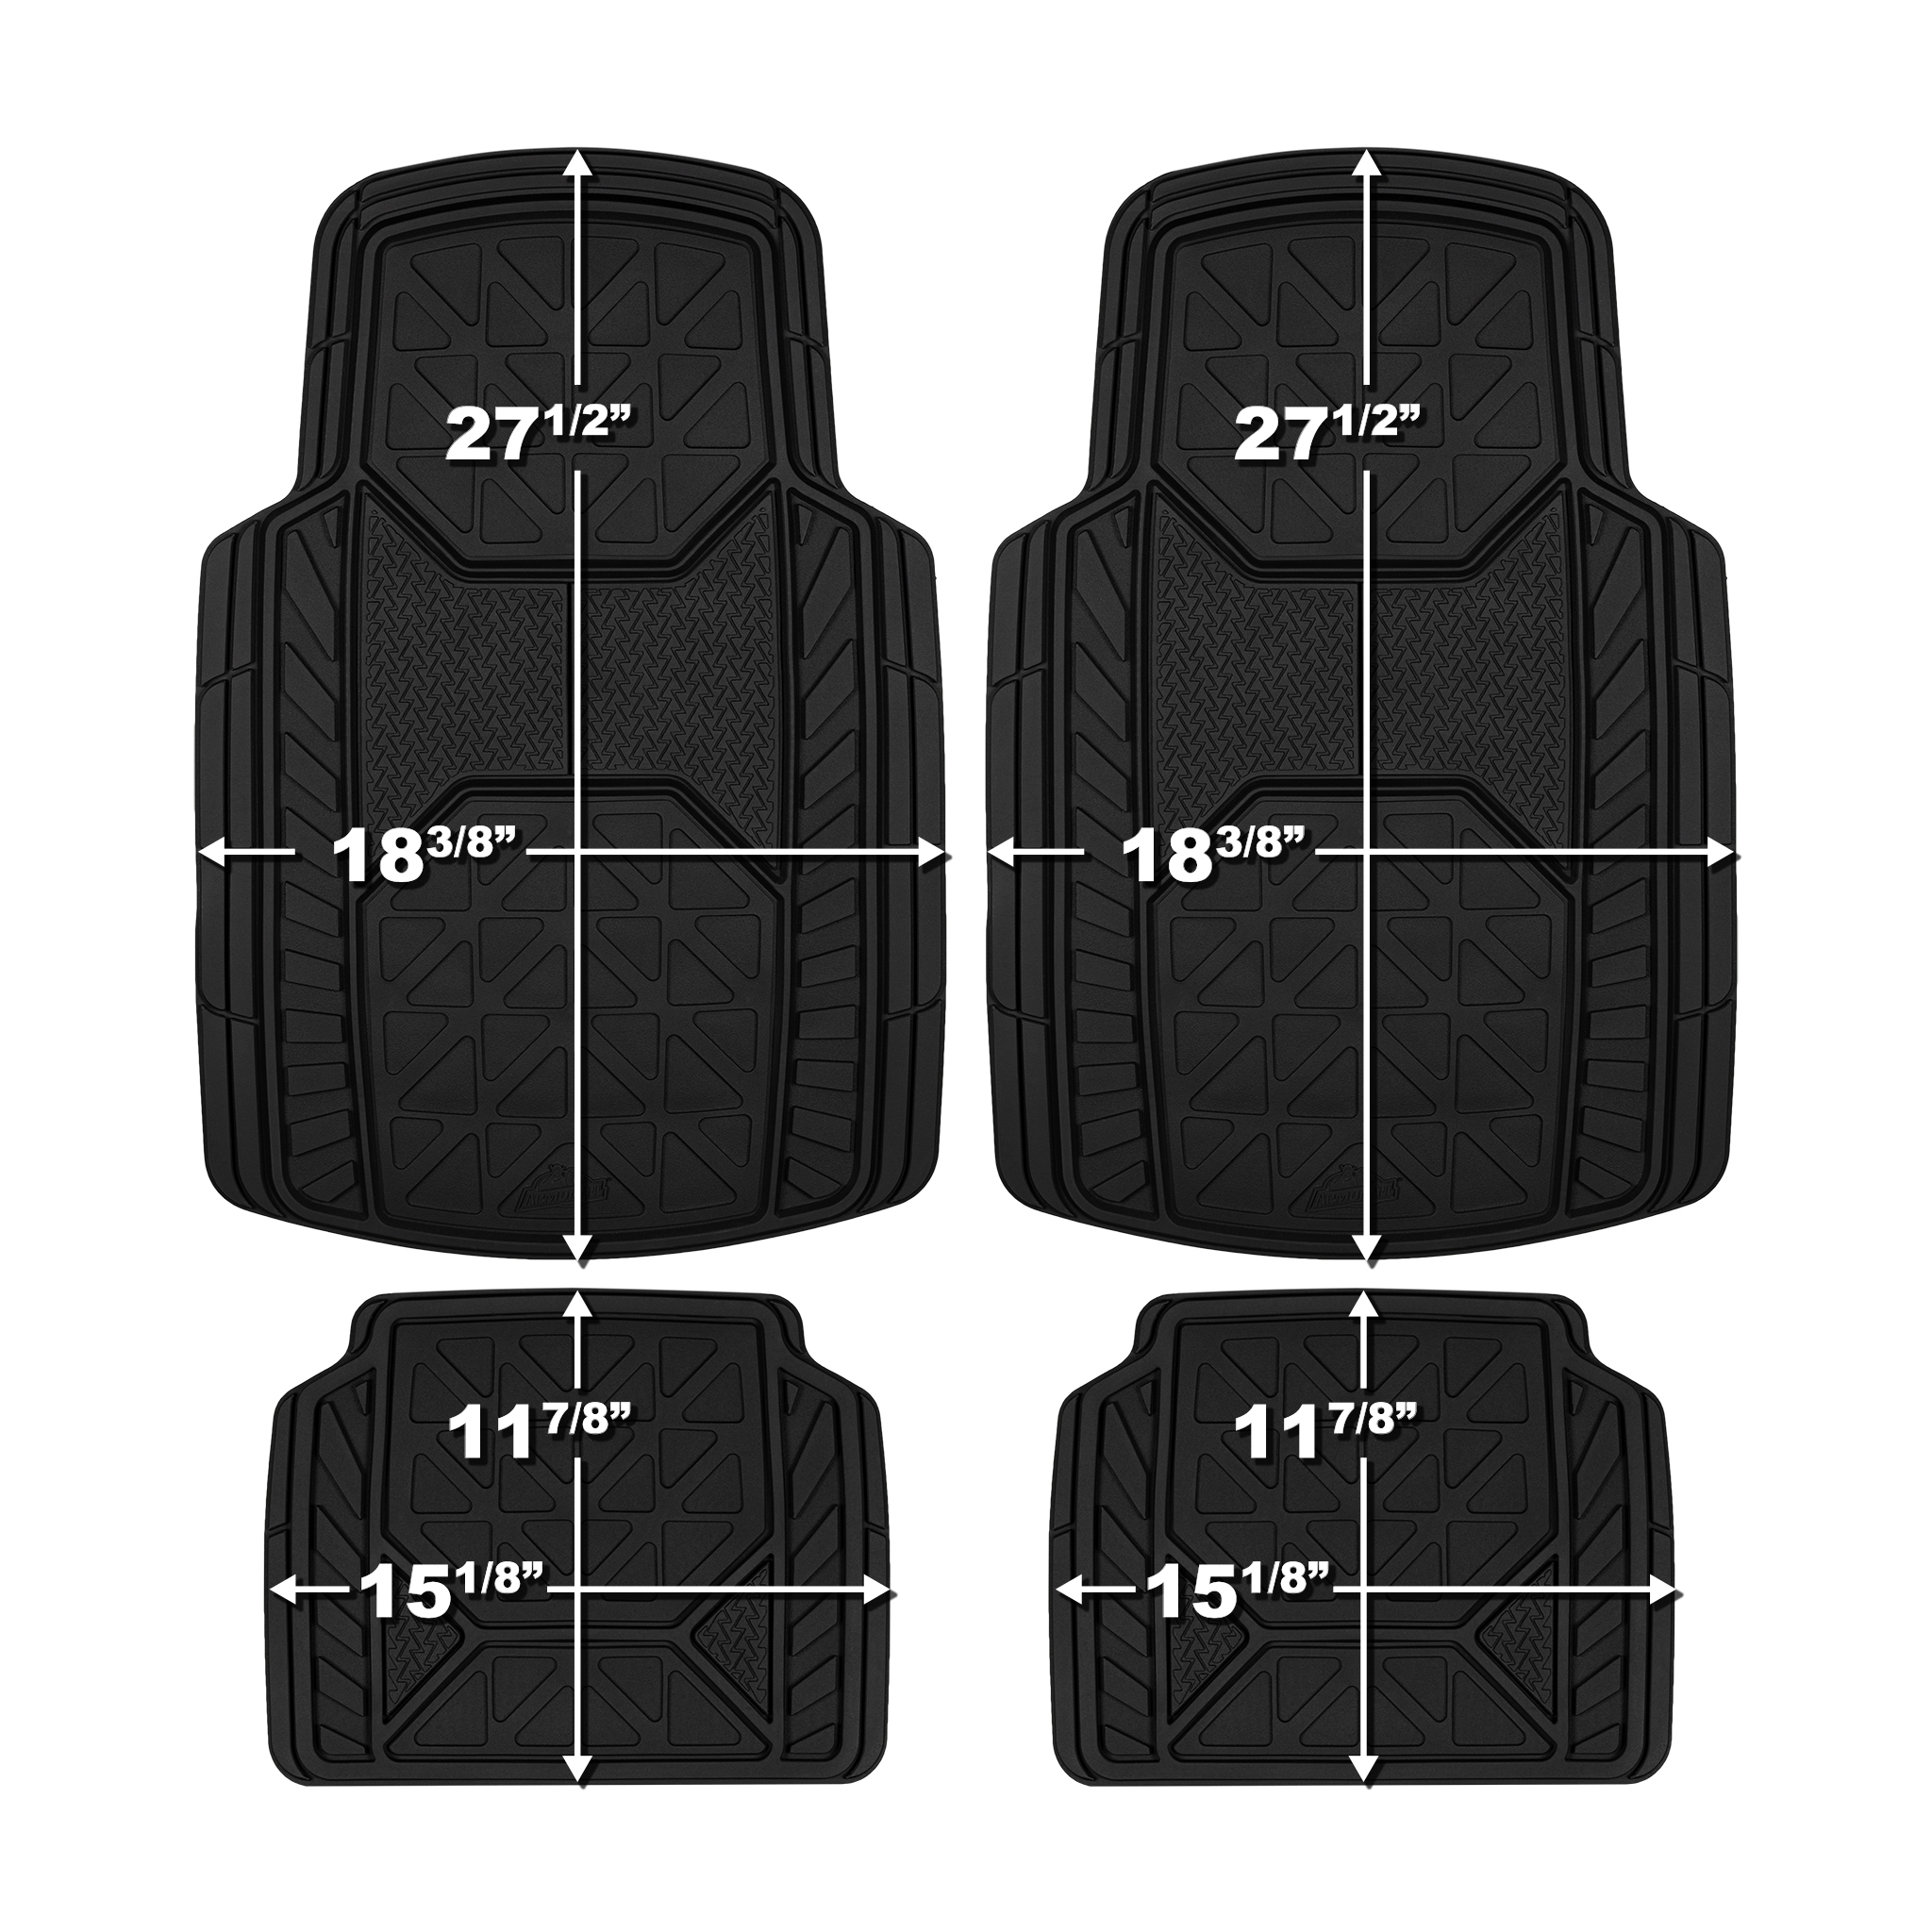 Armor All Floor Mats - Set Dimensioned Cropped.jpg